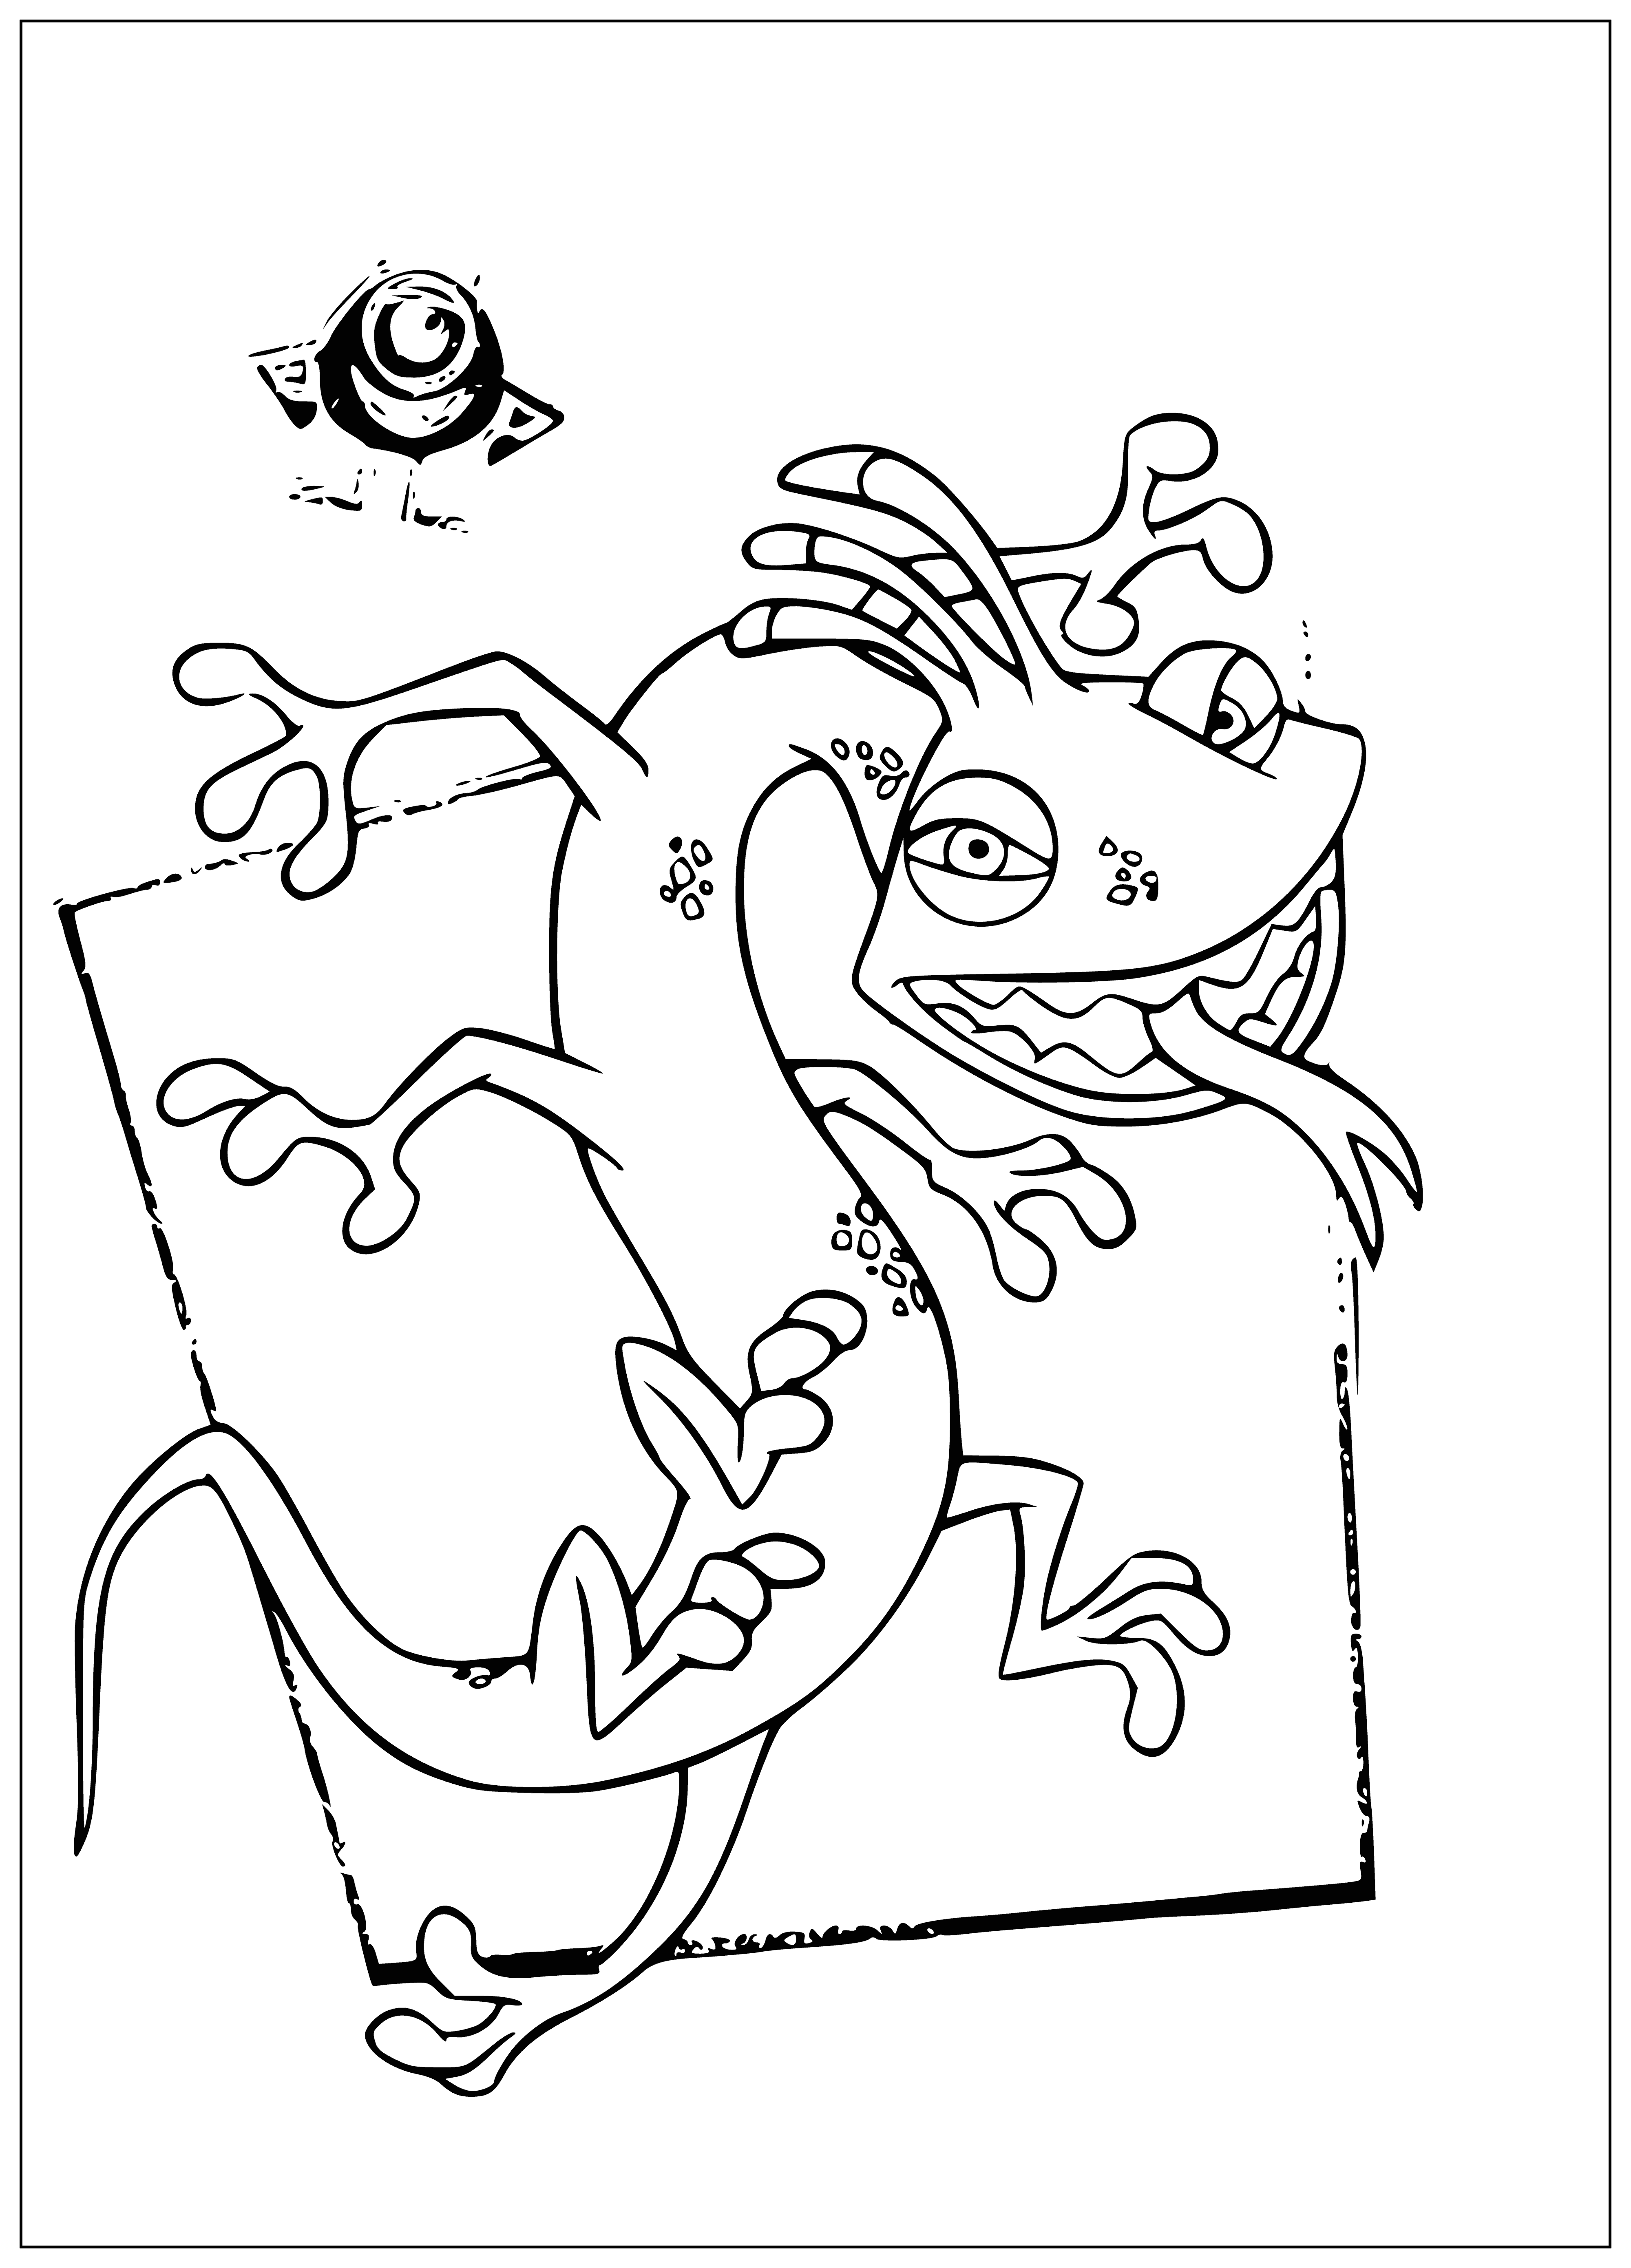 coloring page: Large, scaly purple monster with horns, snake-like tongue, yellow eyes, wearing a black cape, left hand holds a large black stick.